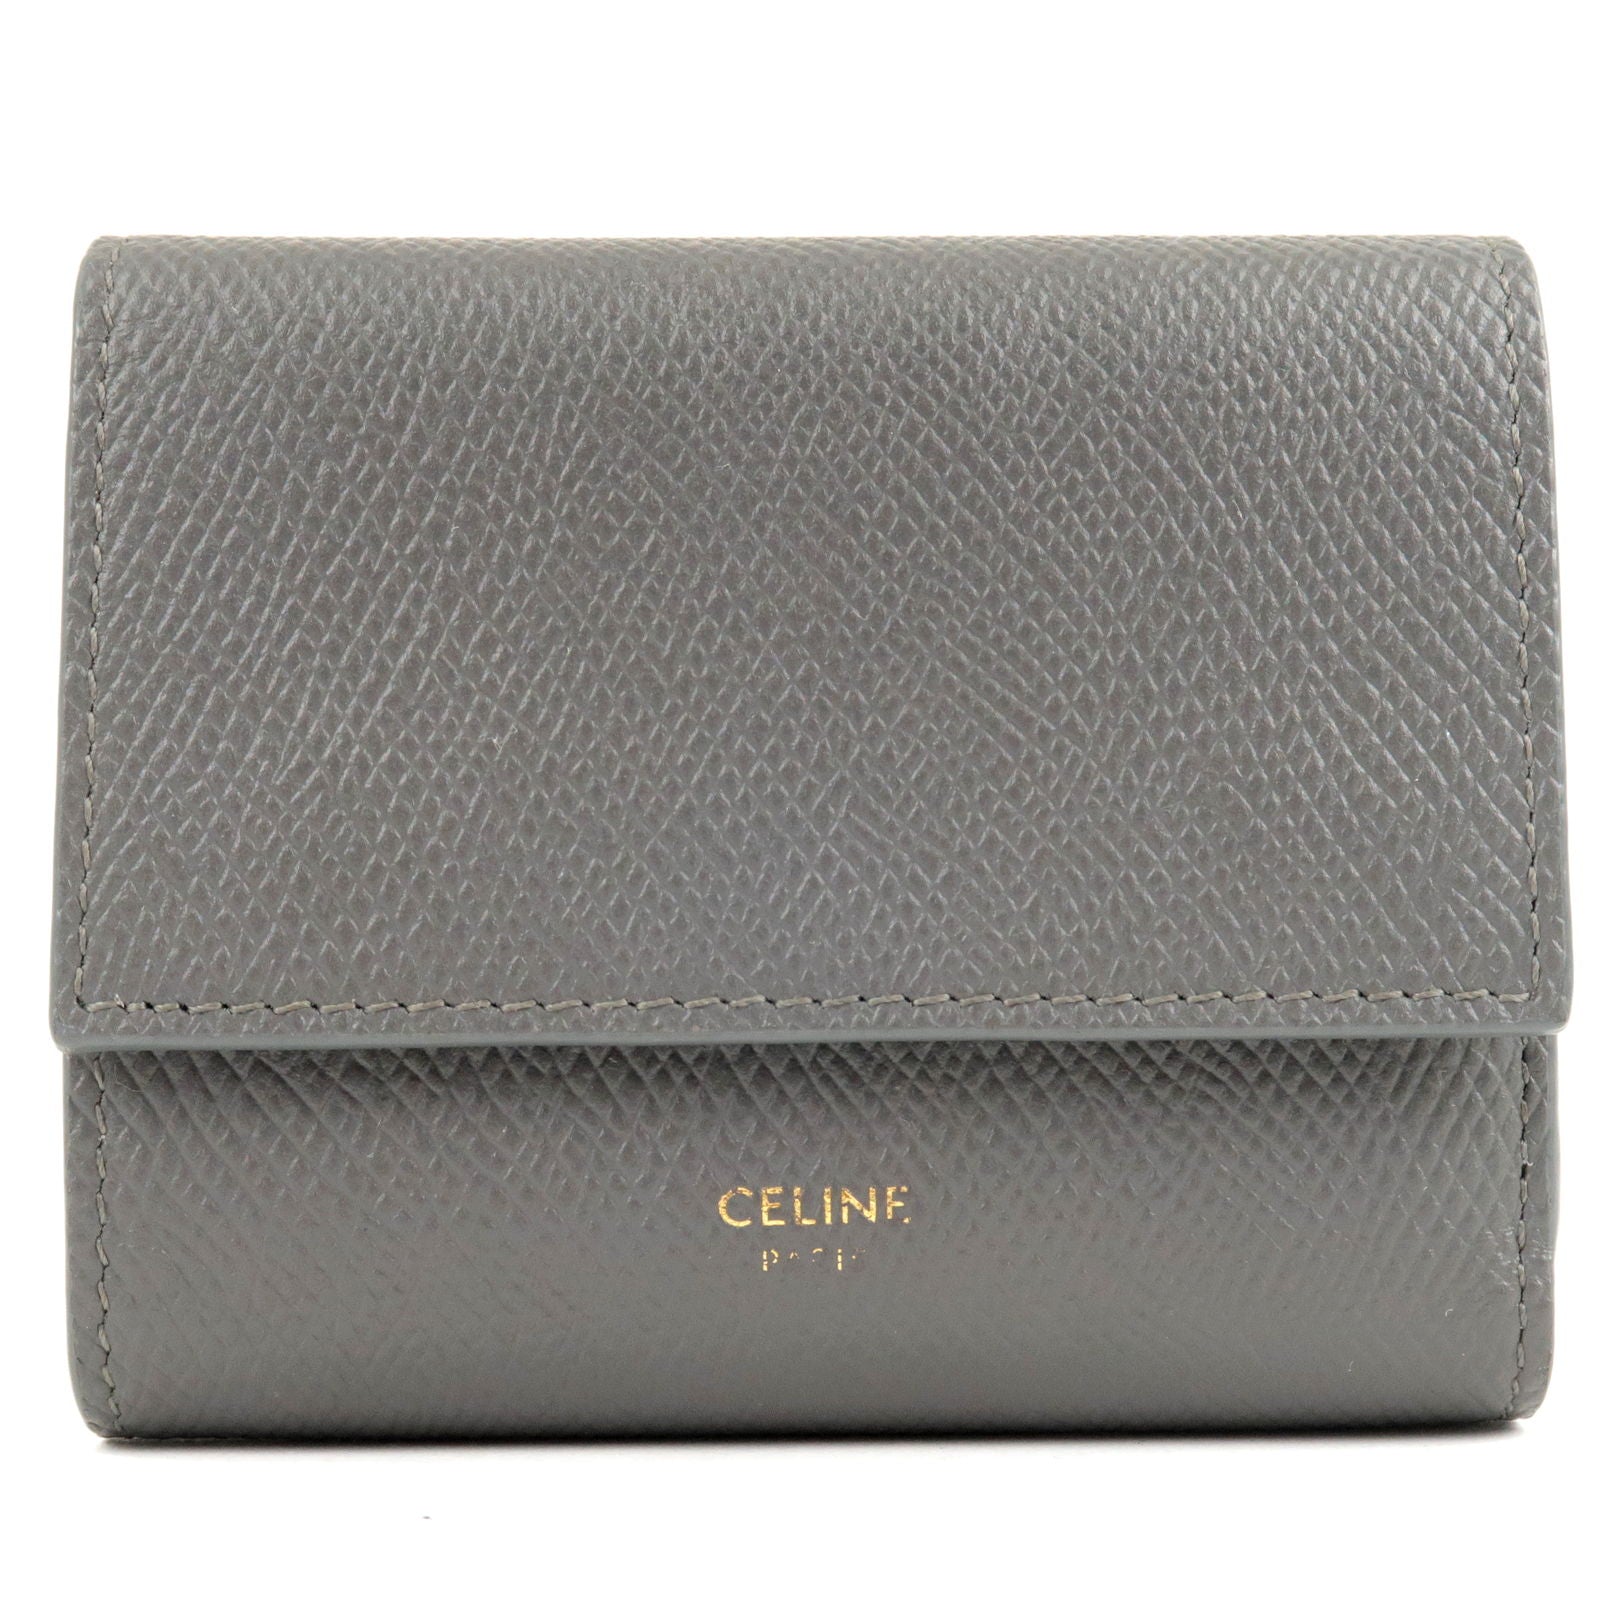 CELINE-Leather-Tri-fold-Compact-Small-Wallet-Gray-10B573